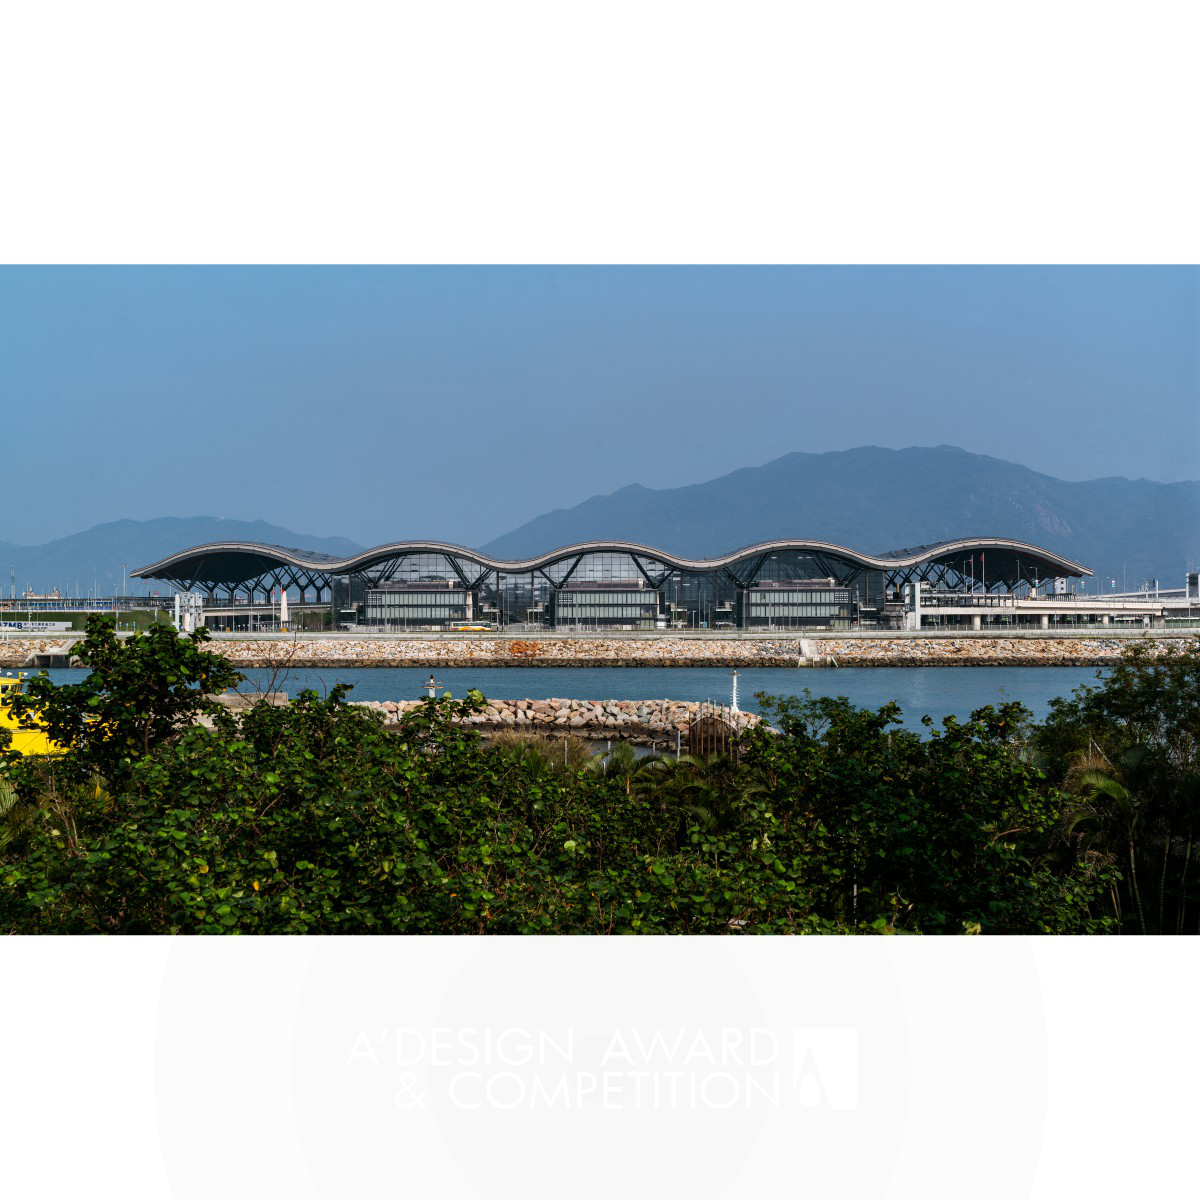 HKBCF - Passenger Clearance Building Cross Border Crossing Facility by Aedas